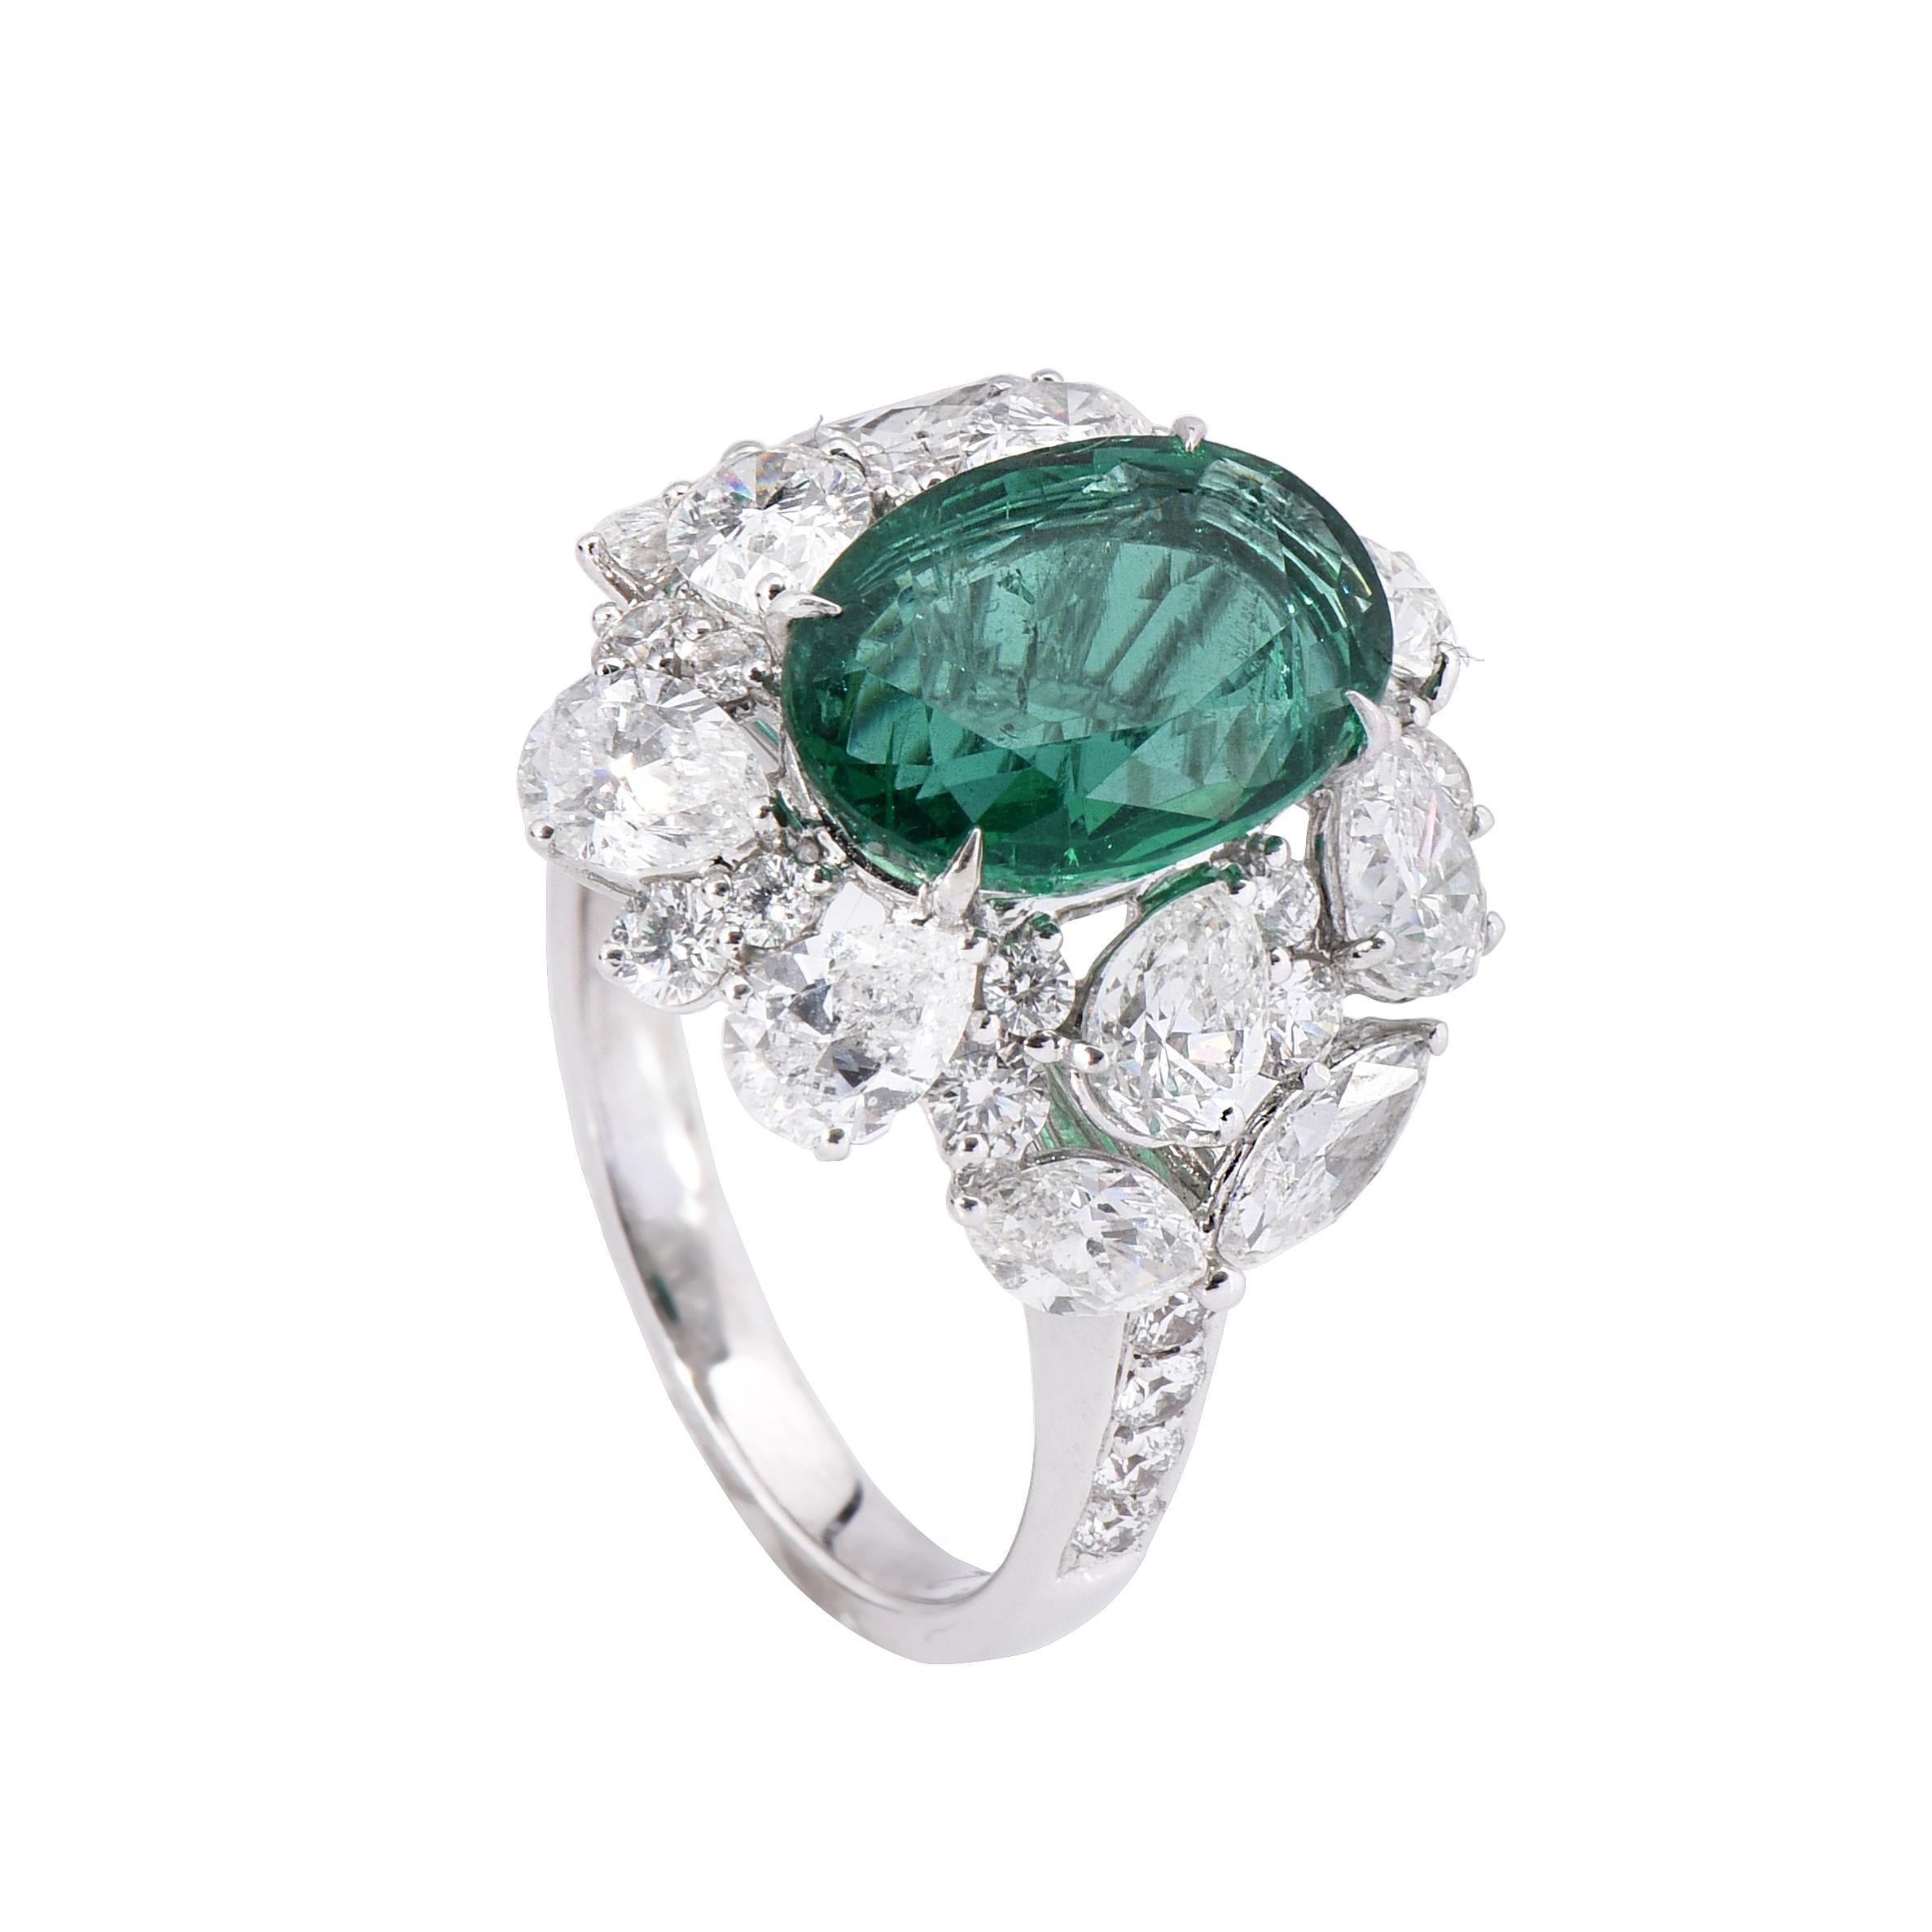 18 karat white gold emerald ring from the Viridian collection of Laviere. The ring is set with a GIA certified 3.44 carats Zambian oval shape emerald, 0.74 carats round brilliant diamonds and 3.11 carats fancy shape diamonds. 
Gold Weight 7.17